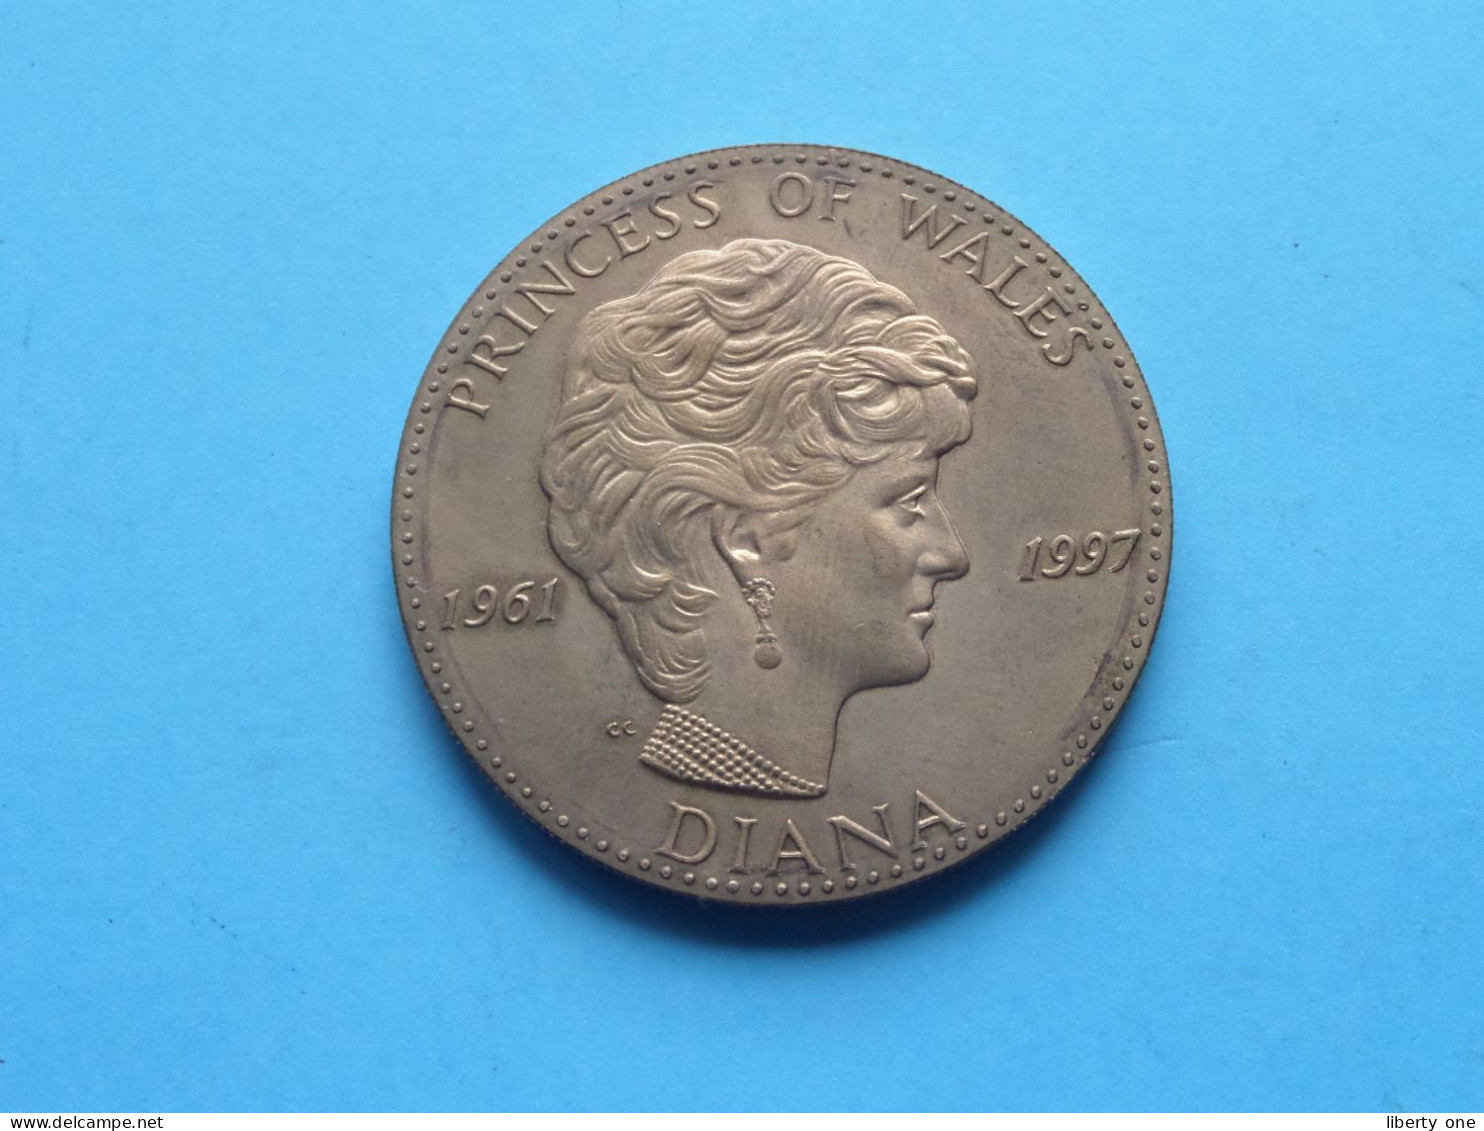 LADY DI - Diana Princess Of Wales 1997 ( See SCANS ) 33 Gr. / 41 Mm. ( Bronze ) 1961-1997 DIANA ( Belgium Coin ) ! - Elongated Coins